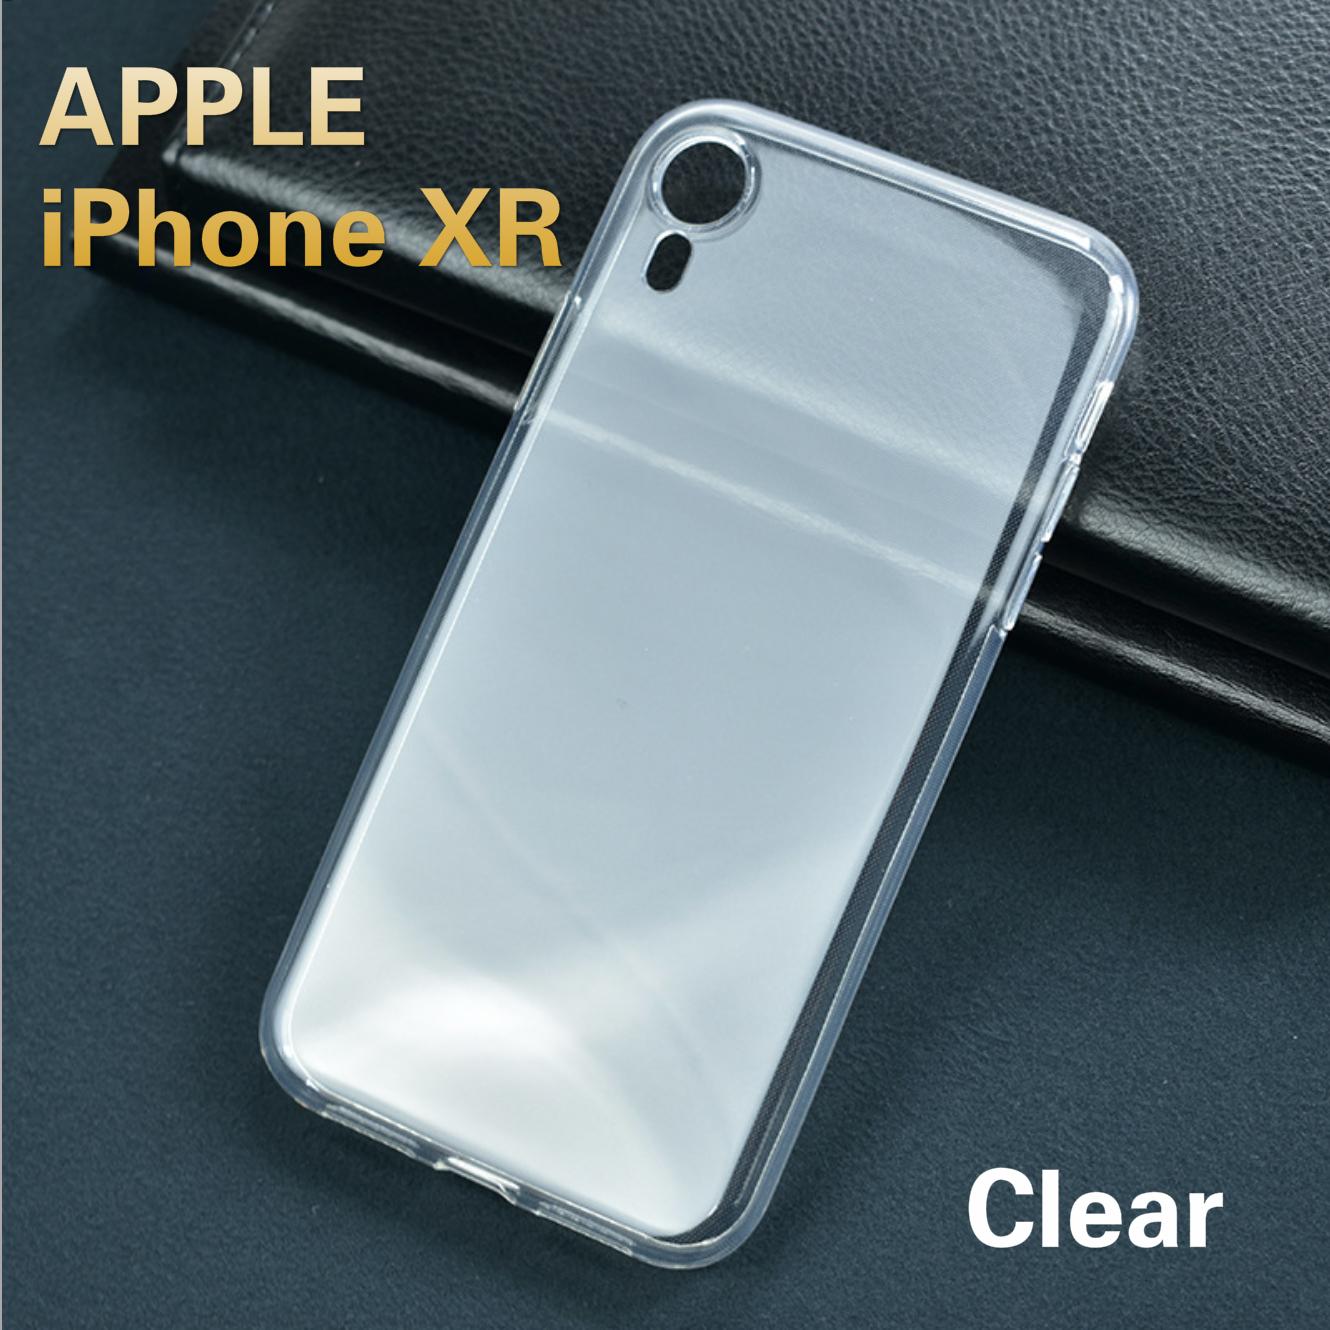 Shockproof Anti-knock Soft Silicone iPhone X iPhone XS iPhone XSMax iPhone XR Phone Cover Casing Non Slip Matte Surface Premium Quality